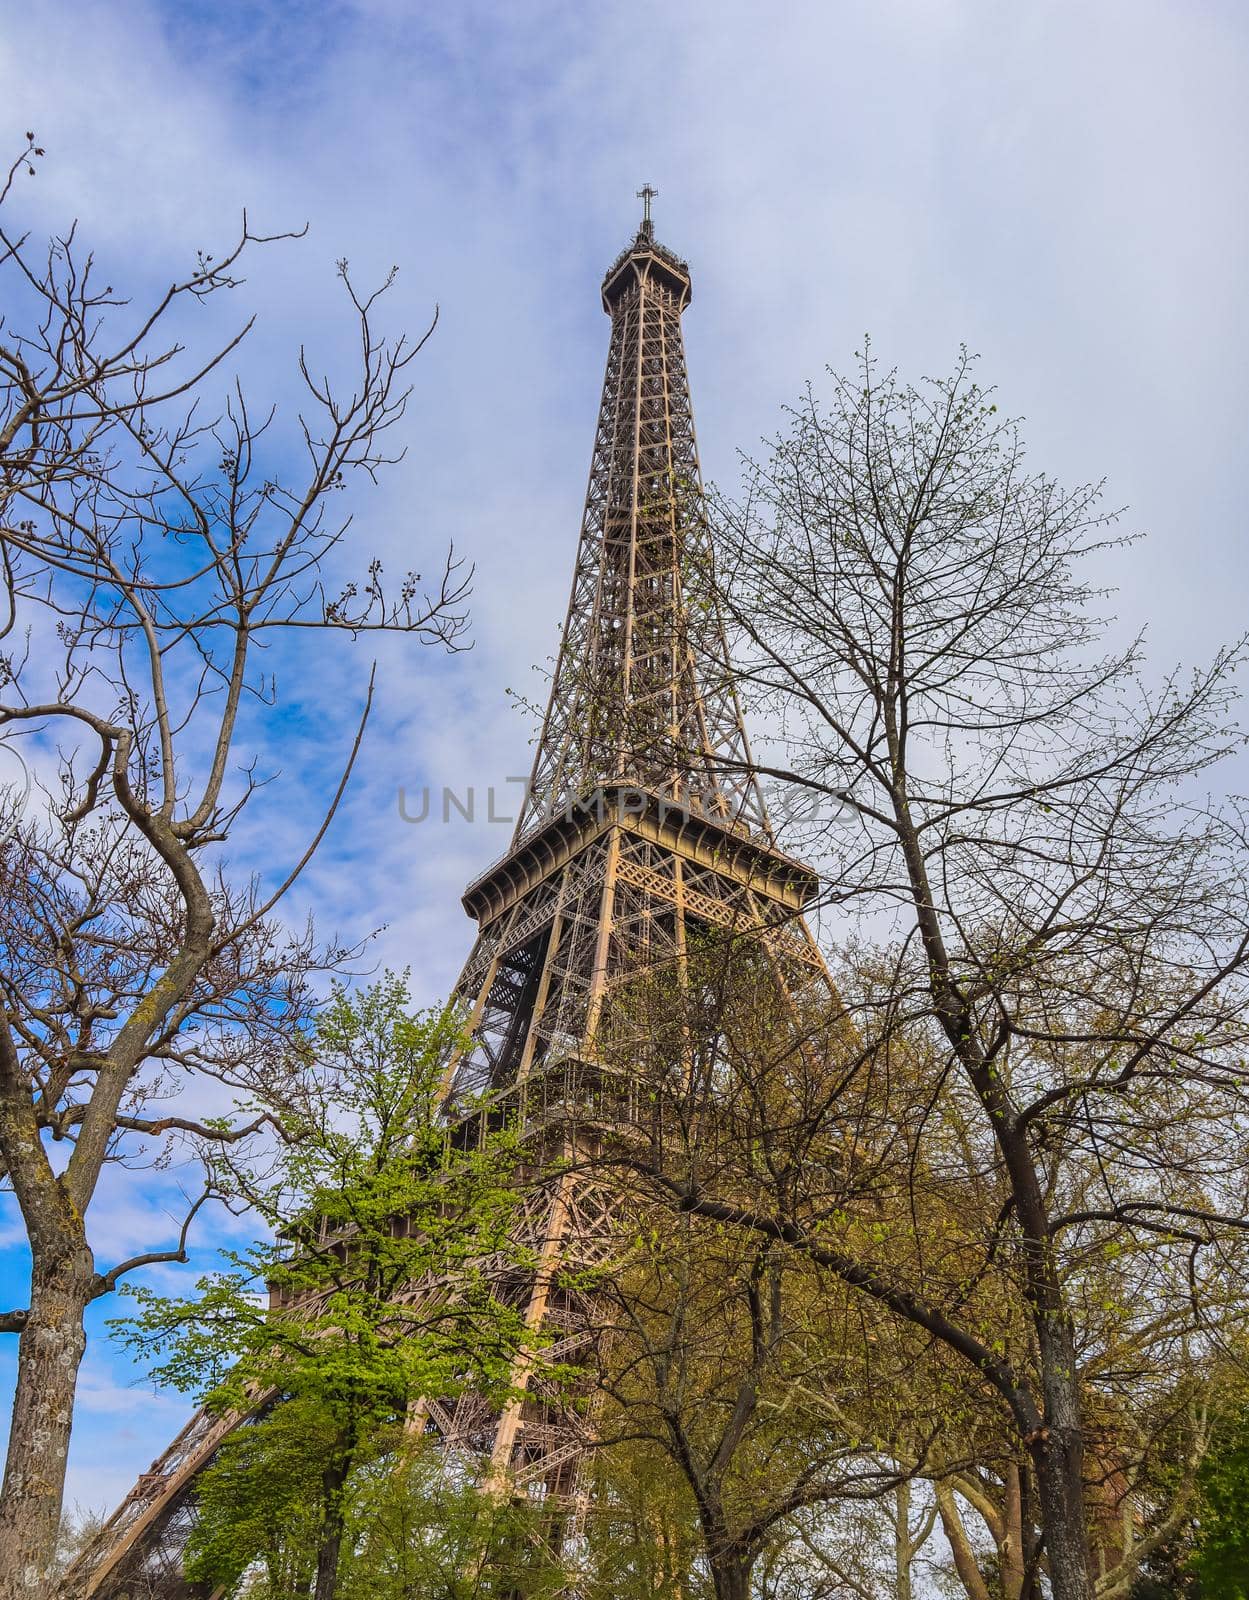 Eiffel Tower in Paris France against blue sky with clouds in spring. April 2019